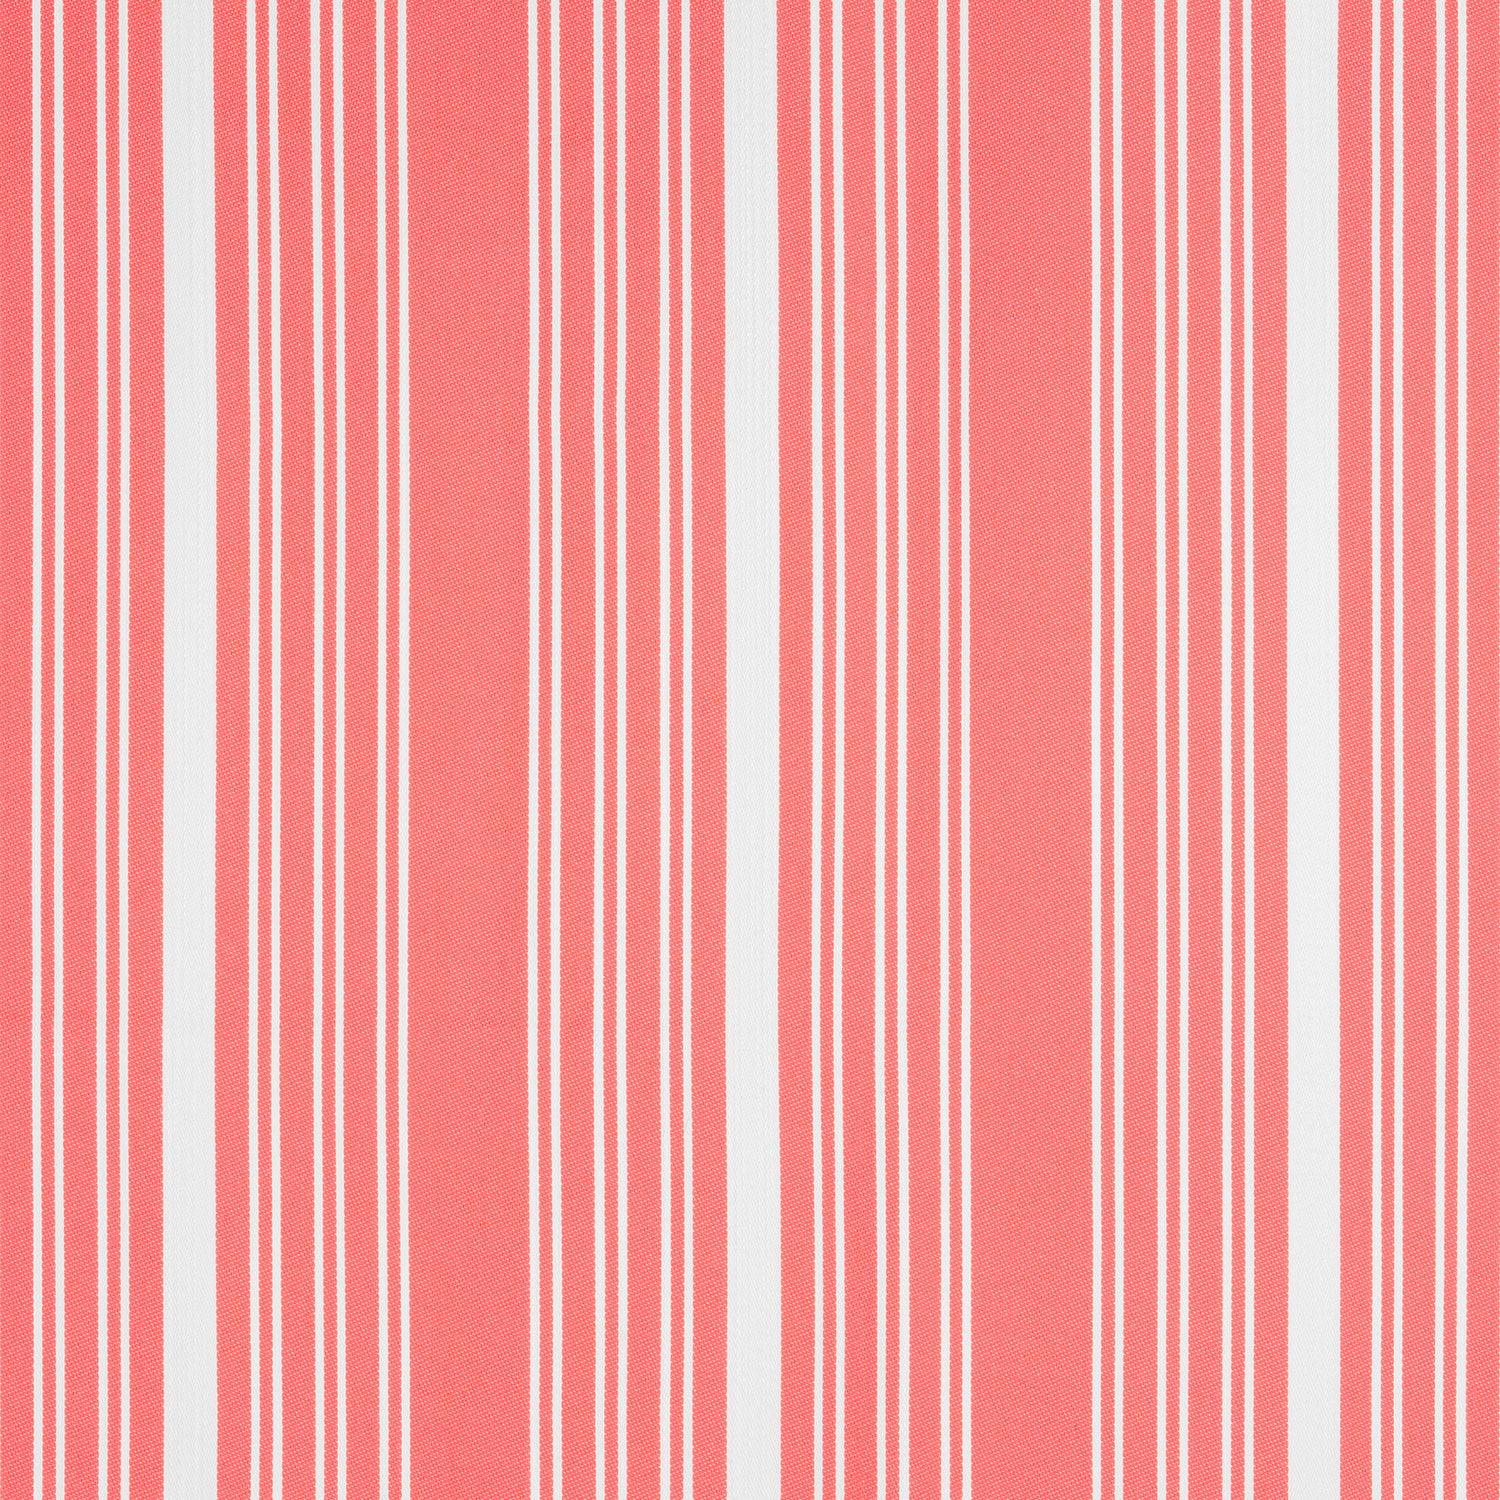 Kaia Stripe fabric in coral color - pattern number W8542 - by Thibaut in the Villa collection